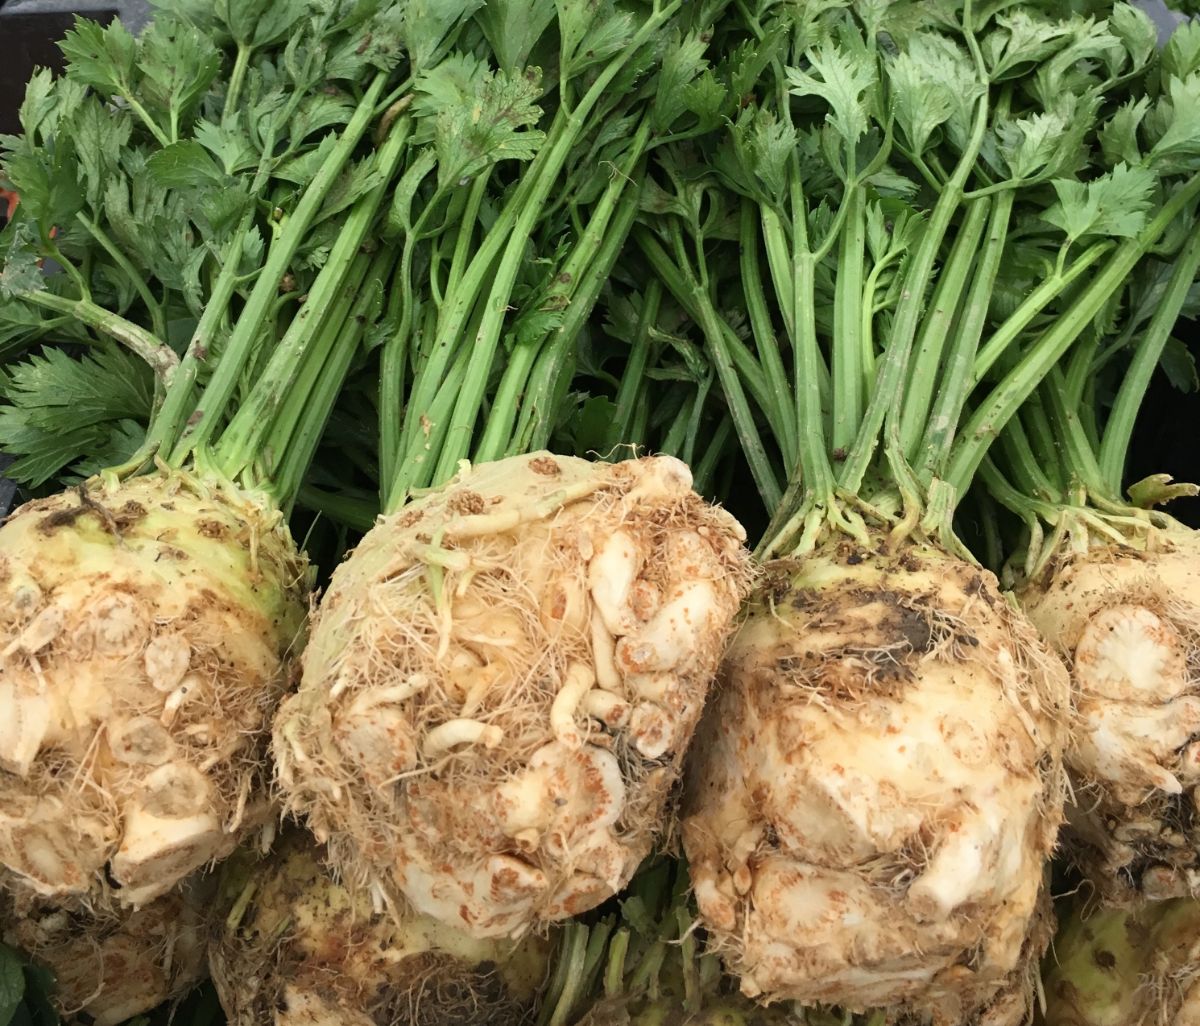 A bundle of cleaned celeriac roots